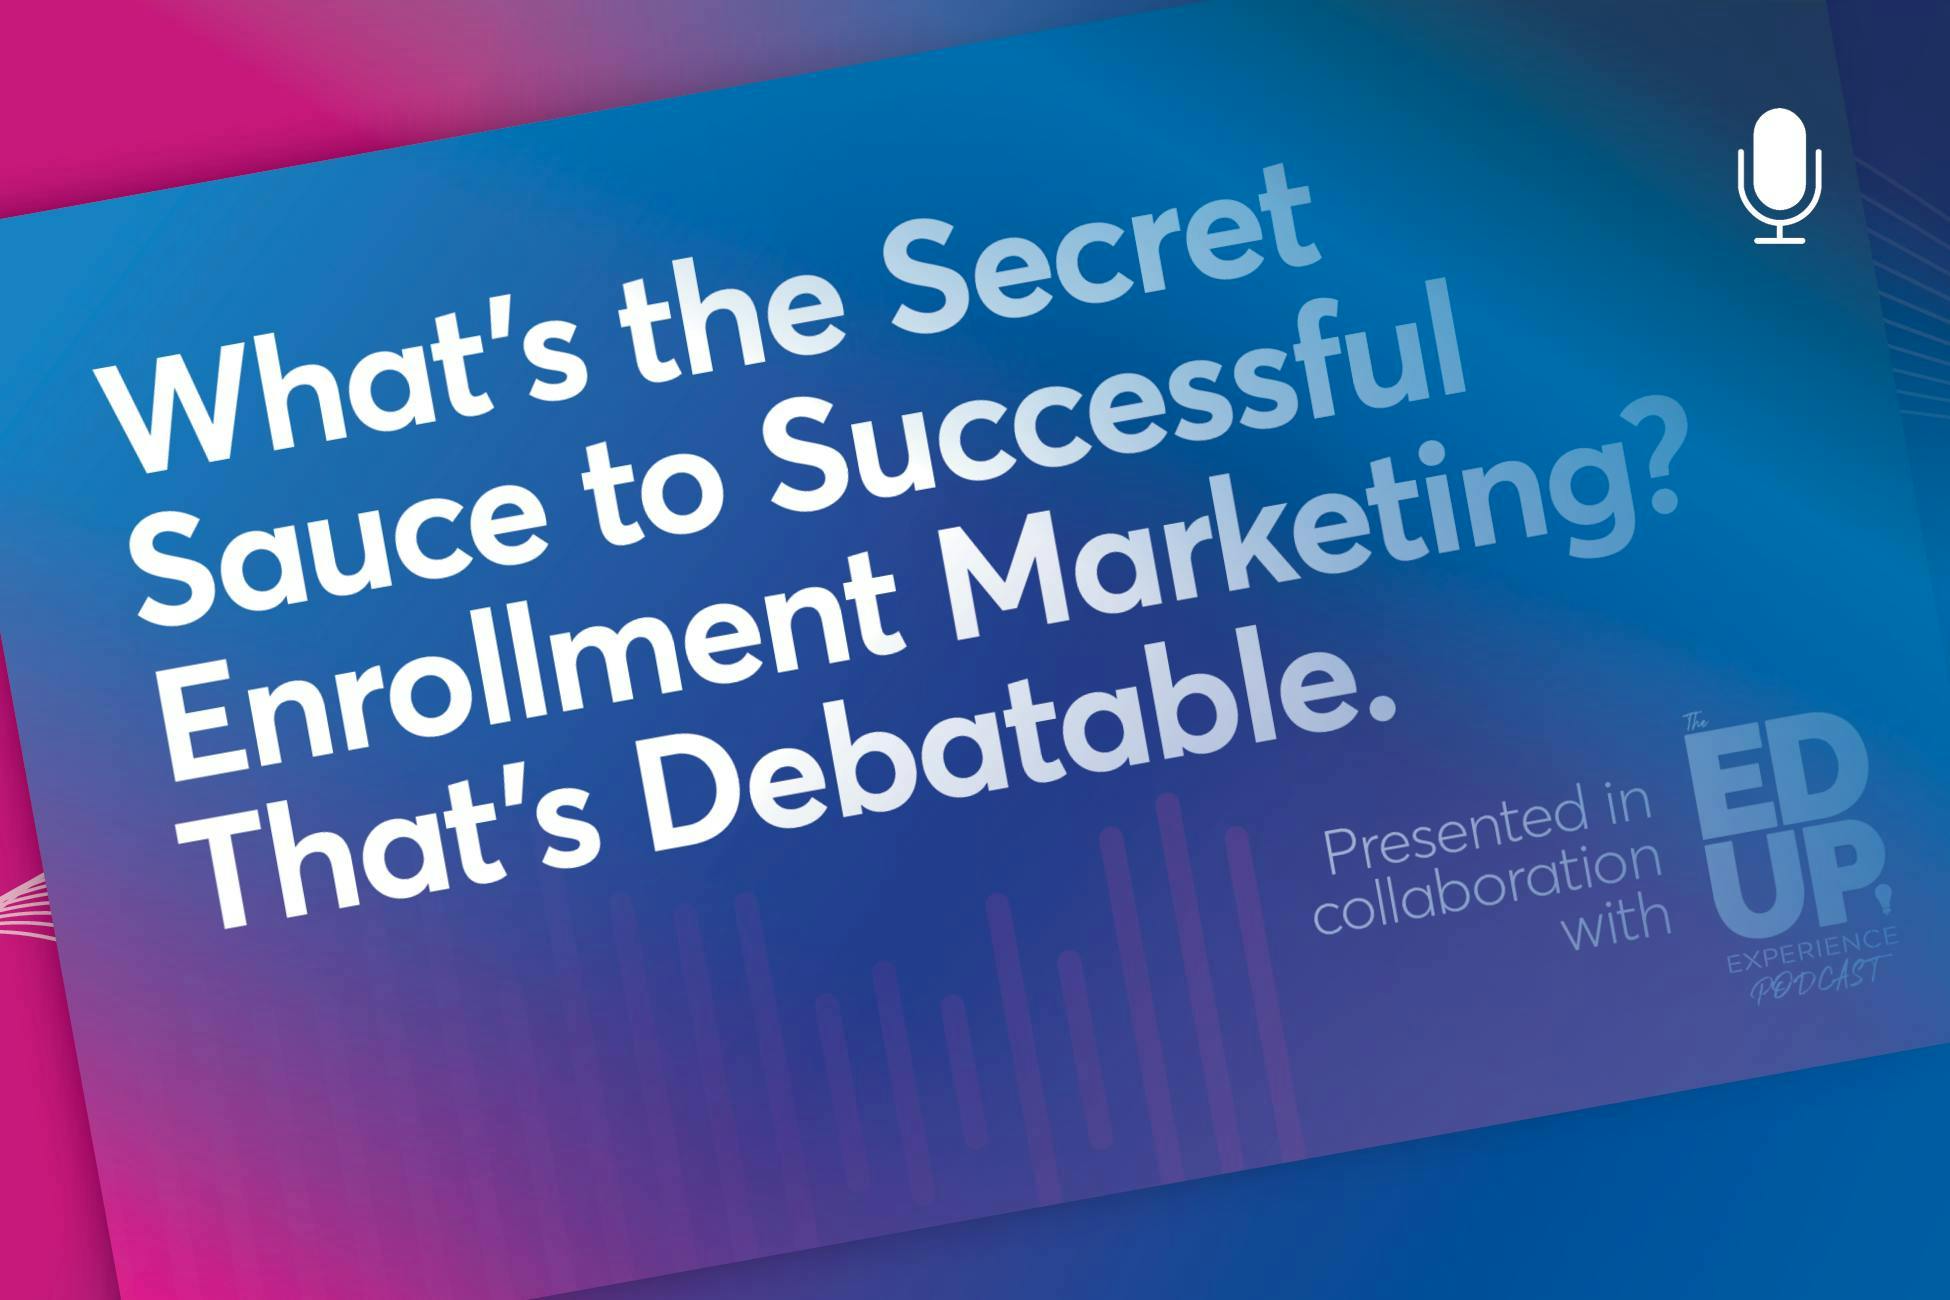 What’s the Secret Sauce to Successful Enrollment Marketing? That’s Debatable.